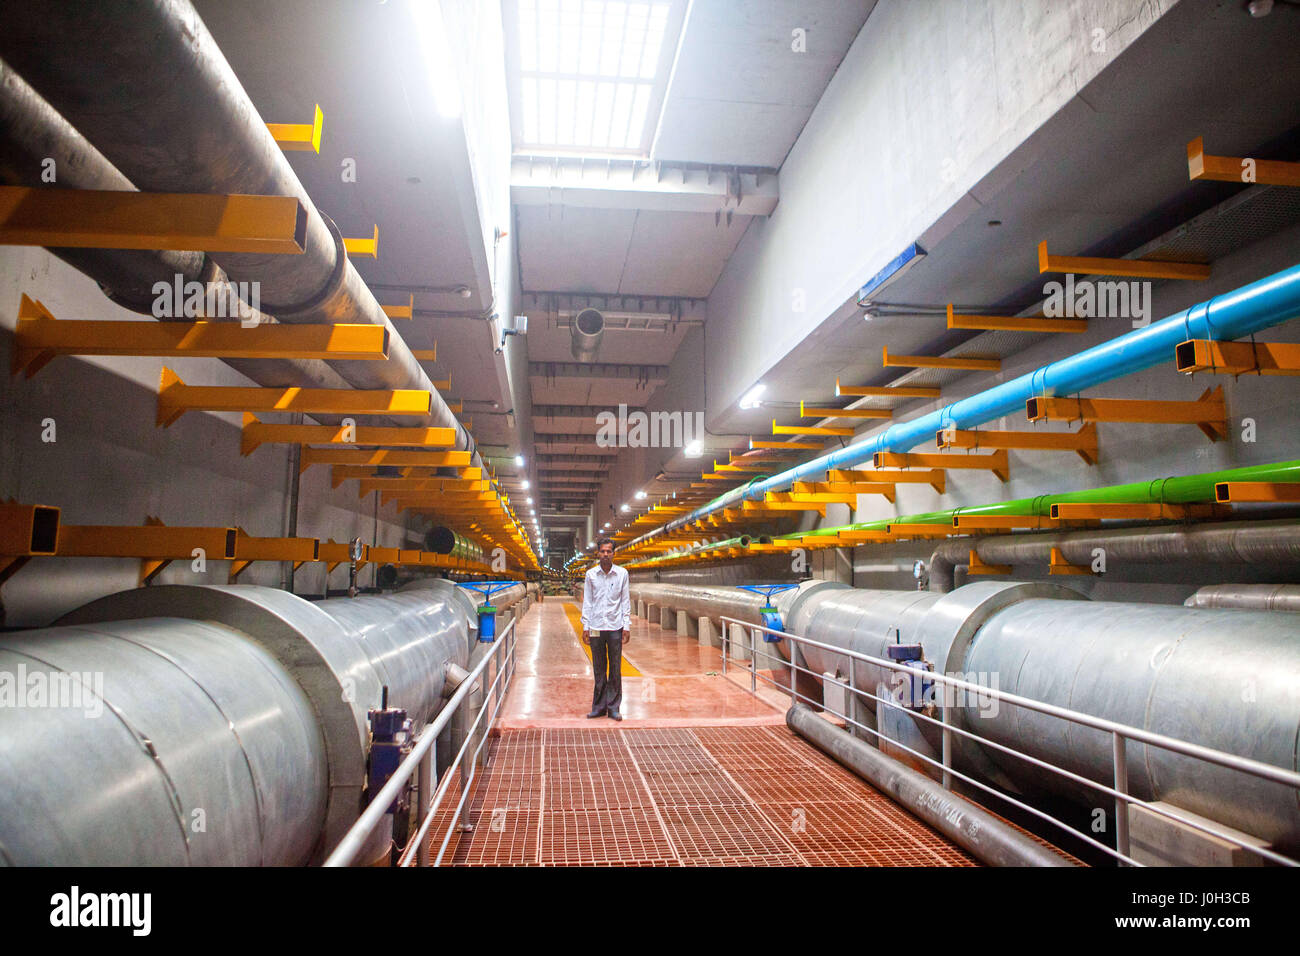 Gift City, Gujarat, India. 20th Mar, 2017. 20 March 2017 - GIFT city, India.An extensive Underground Utility Tunnel which runs along the length & breadth of the city is a unique infrastructure feature of the GIFT city. Credit: Subhash Sharma/ZUMA Wire/Alamy Live News Stock Photo